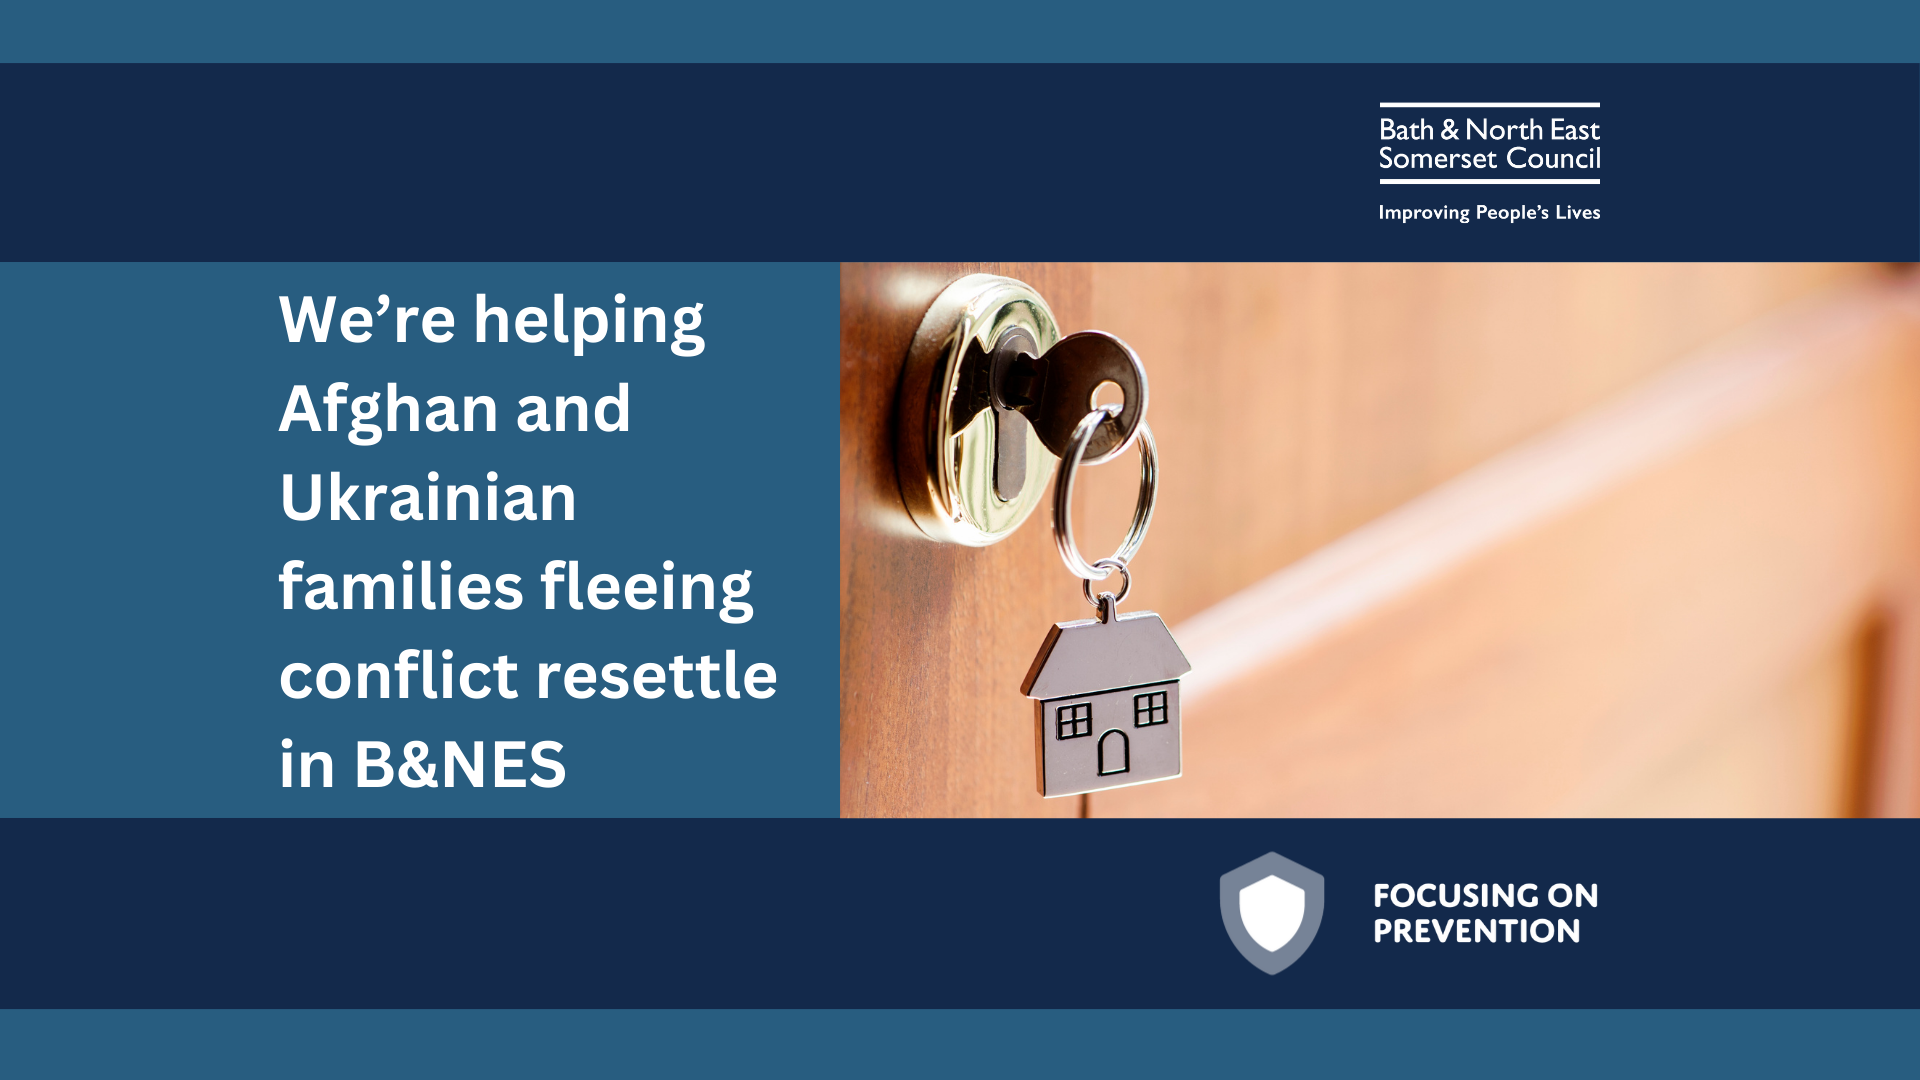 image shows a key in a door with text to the left which says We’re helping Afghan and Ukrainian families fleeing conflict resettle in B&NES